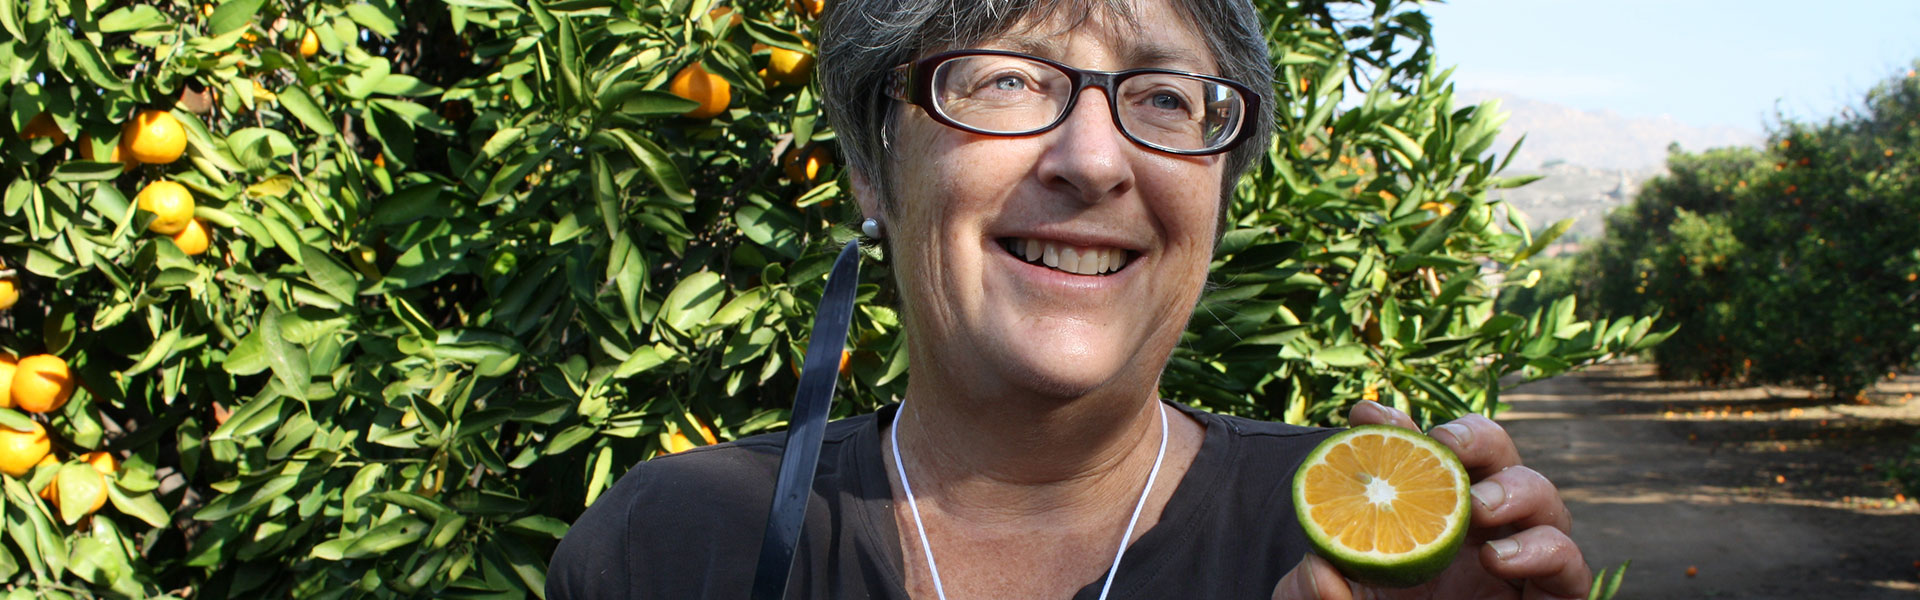 Dr Tracy Kahn, curator of the UCR Citrus Variety Collection and holder of the Givaudan Citrus Variety Collection Endowed Chair